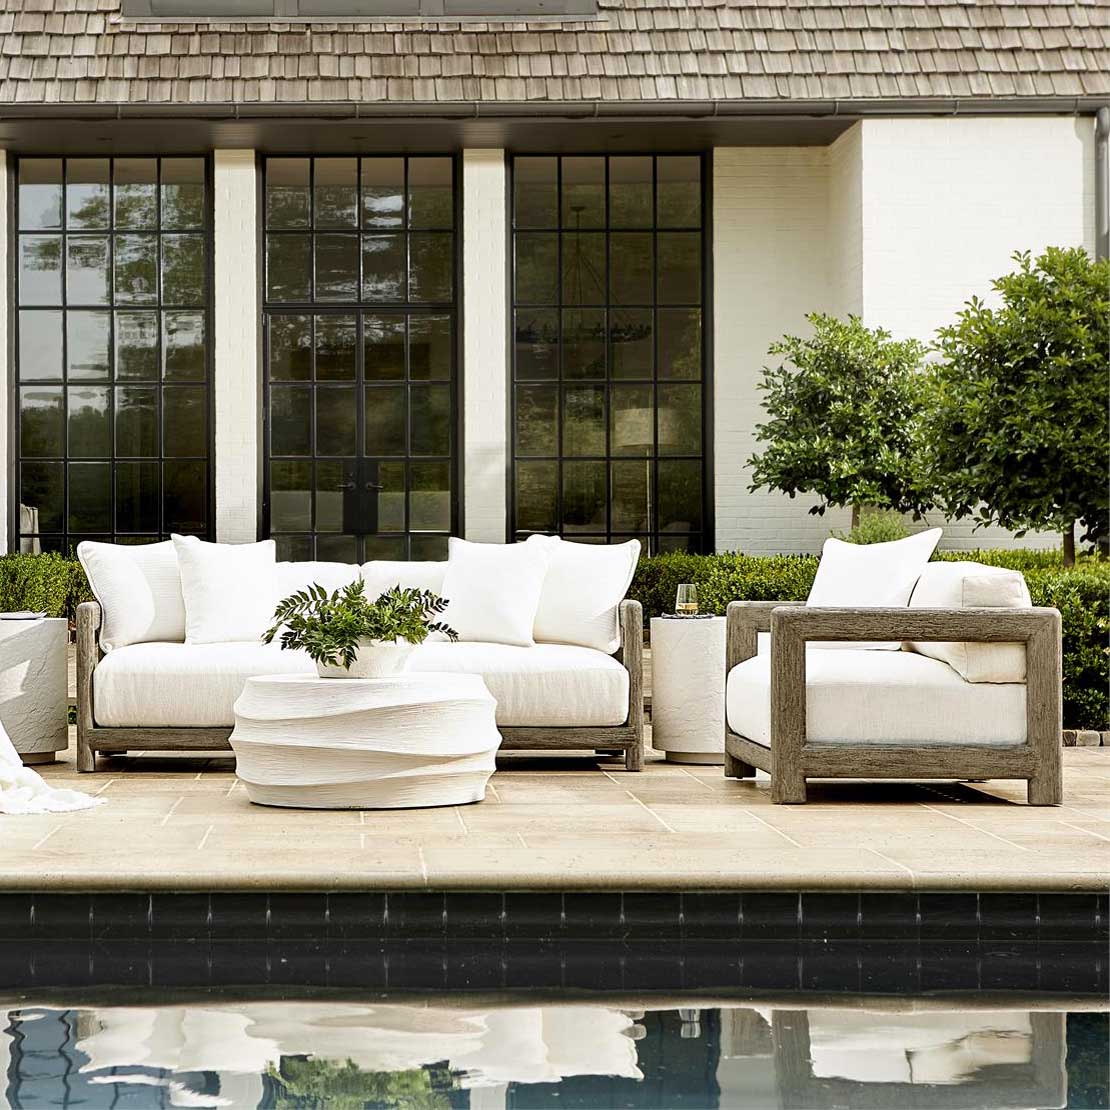 51 Outdoor Patio Furniture Selections for Stylish Sunny Spaces